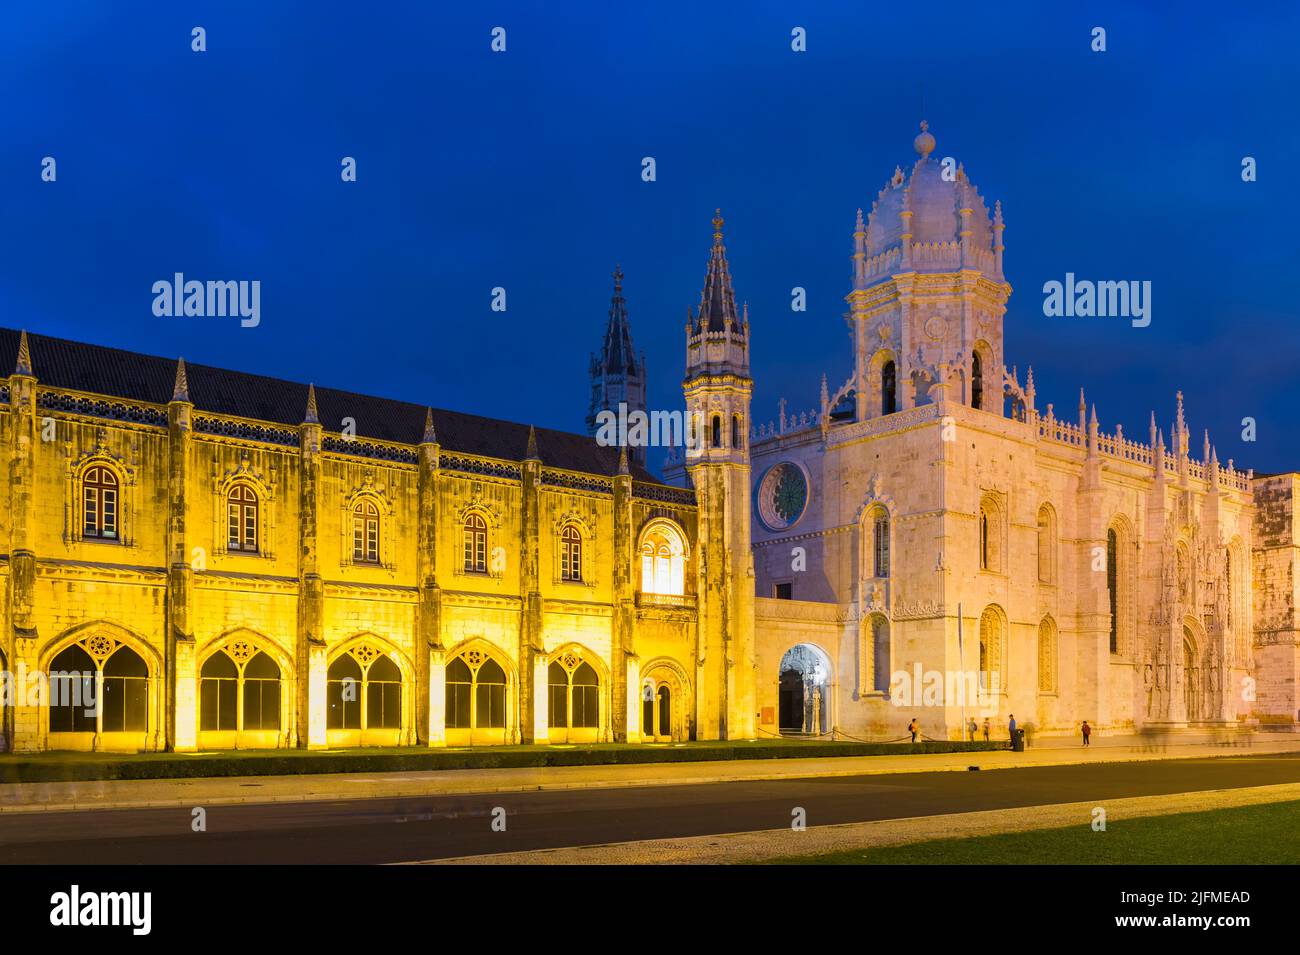 Mosteiro dos Jeronimos, Monastery of the Hieronymites at sunset, Unesco World Heritage Site, Belem district, Lisbon, Portugal Stock Photo